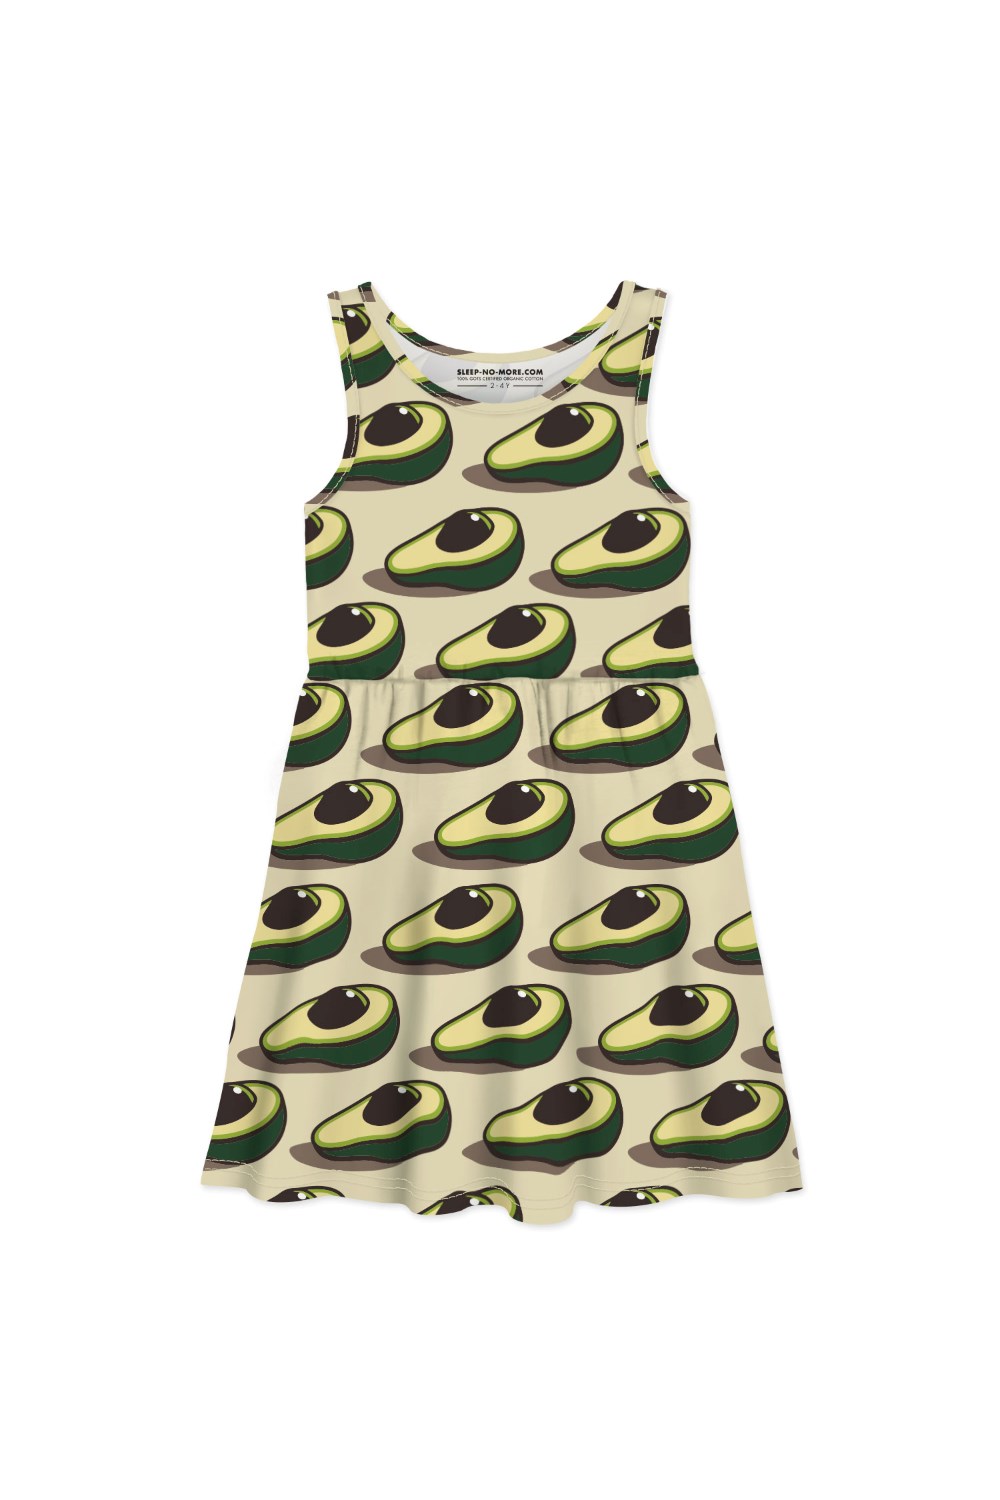 You’re The Avocado To My Toast Toddler Vest Dress -